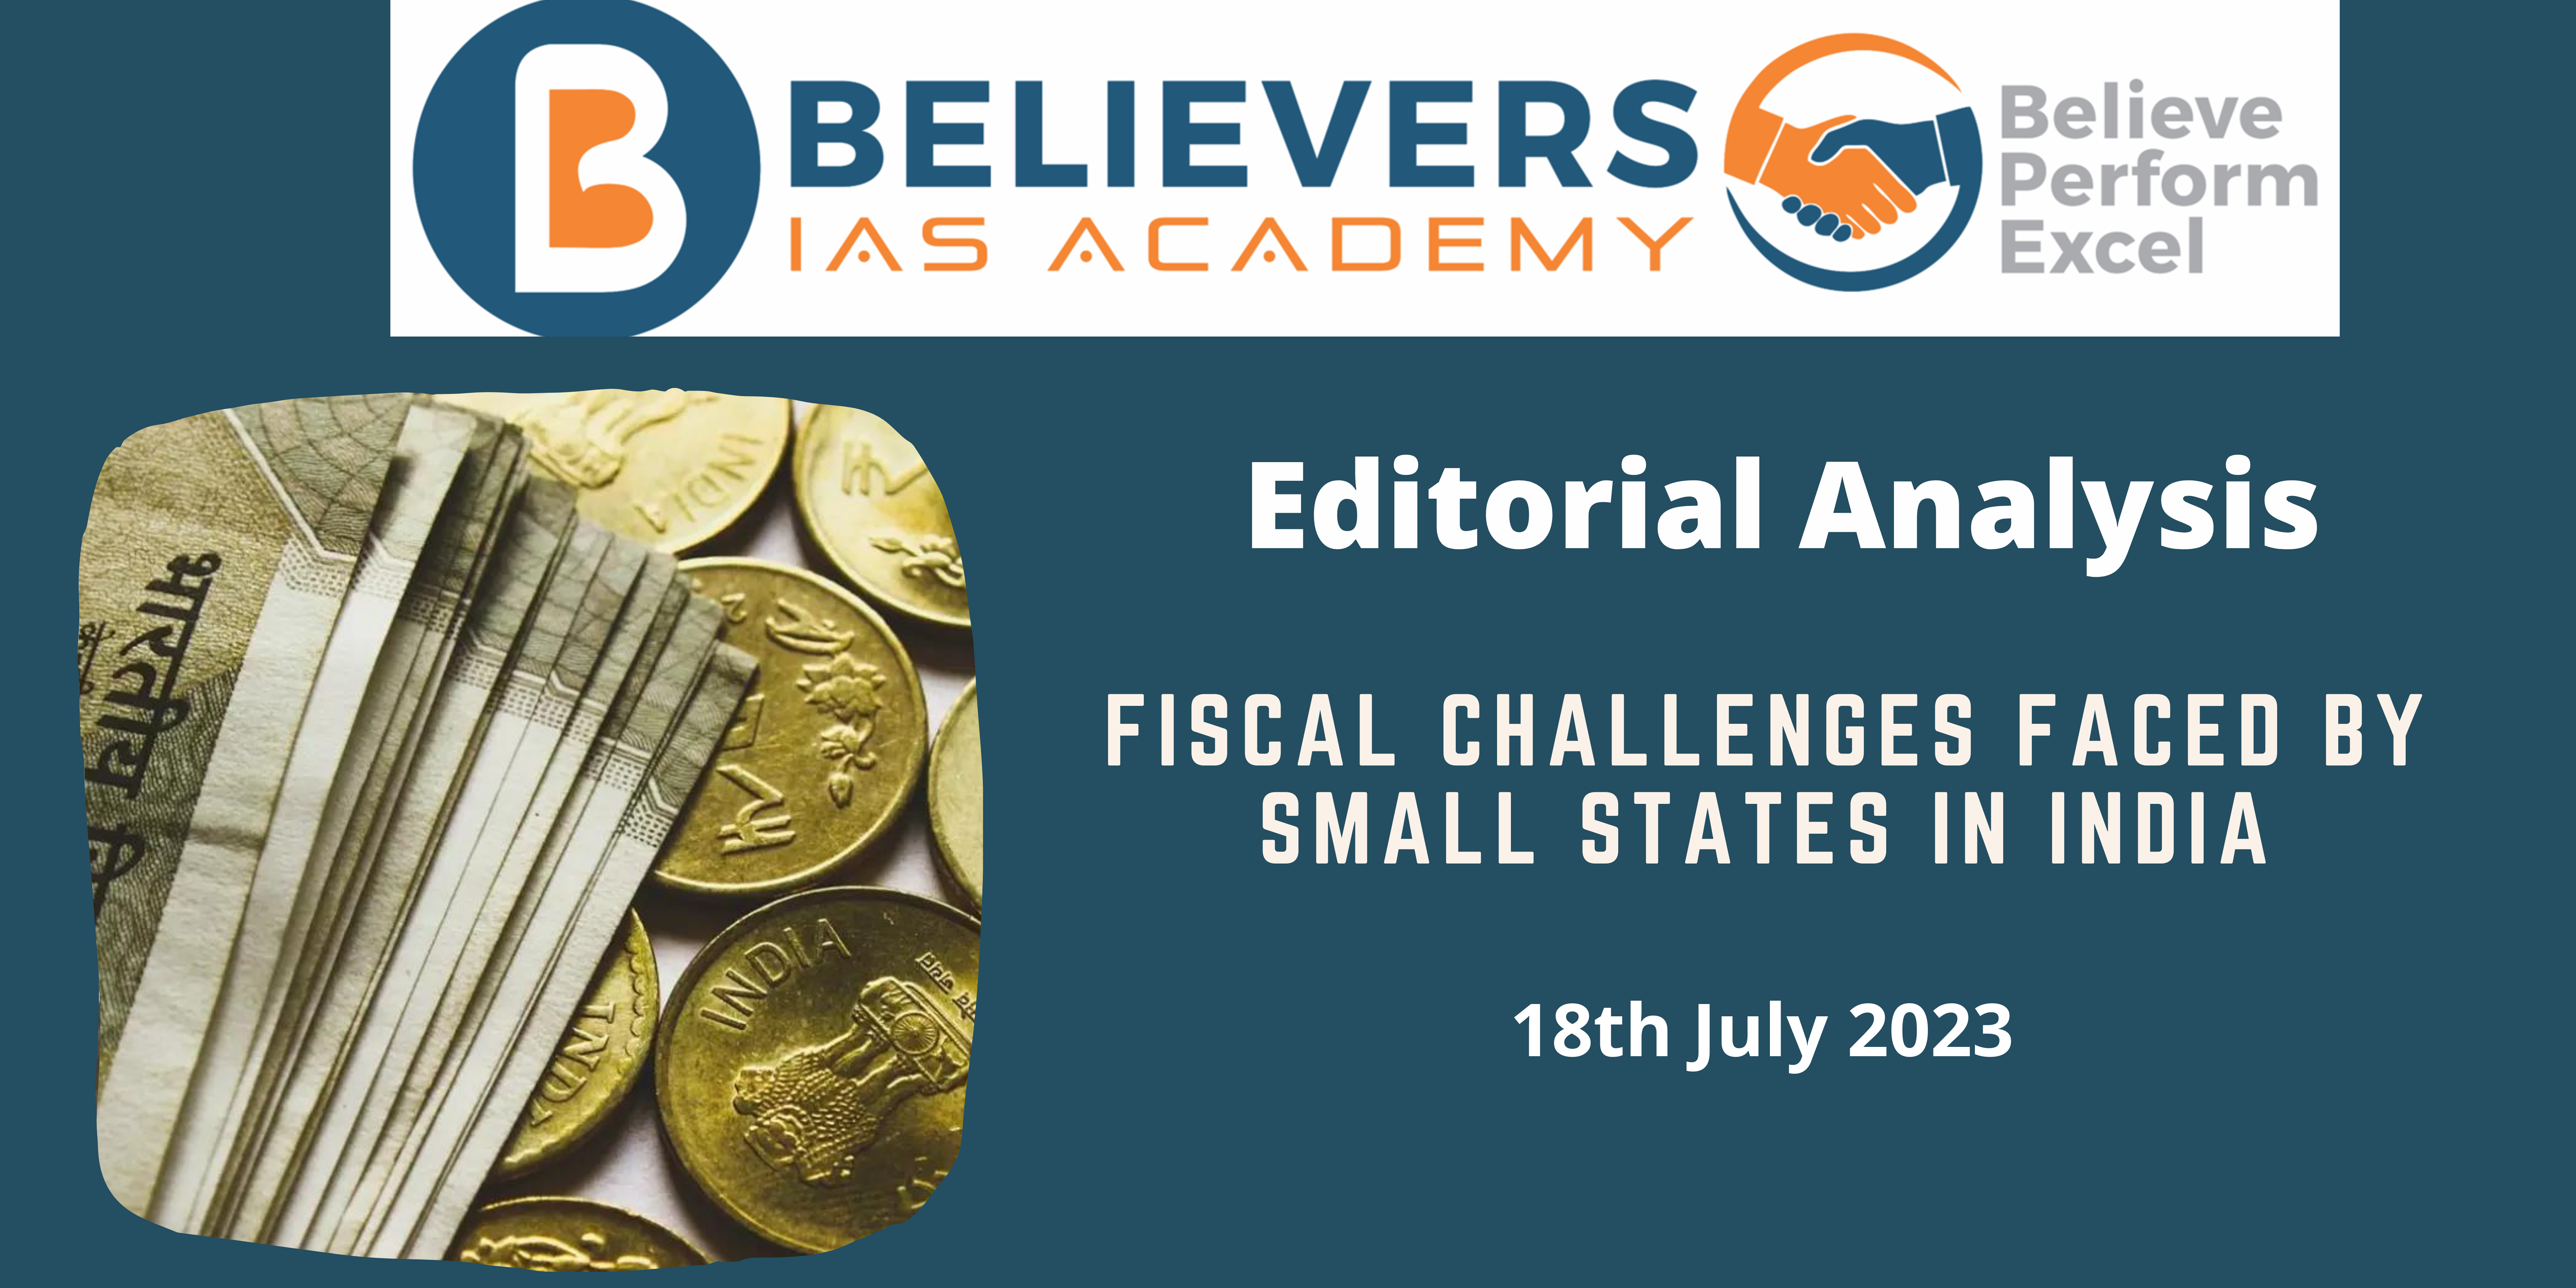 Fiscal Challenges Faced by Small States in India